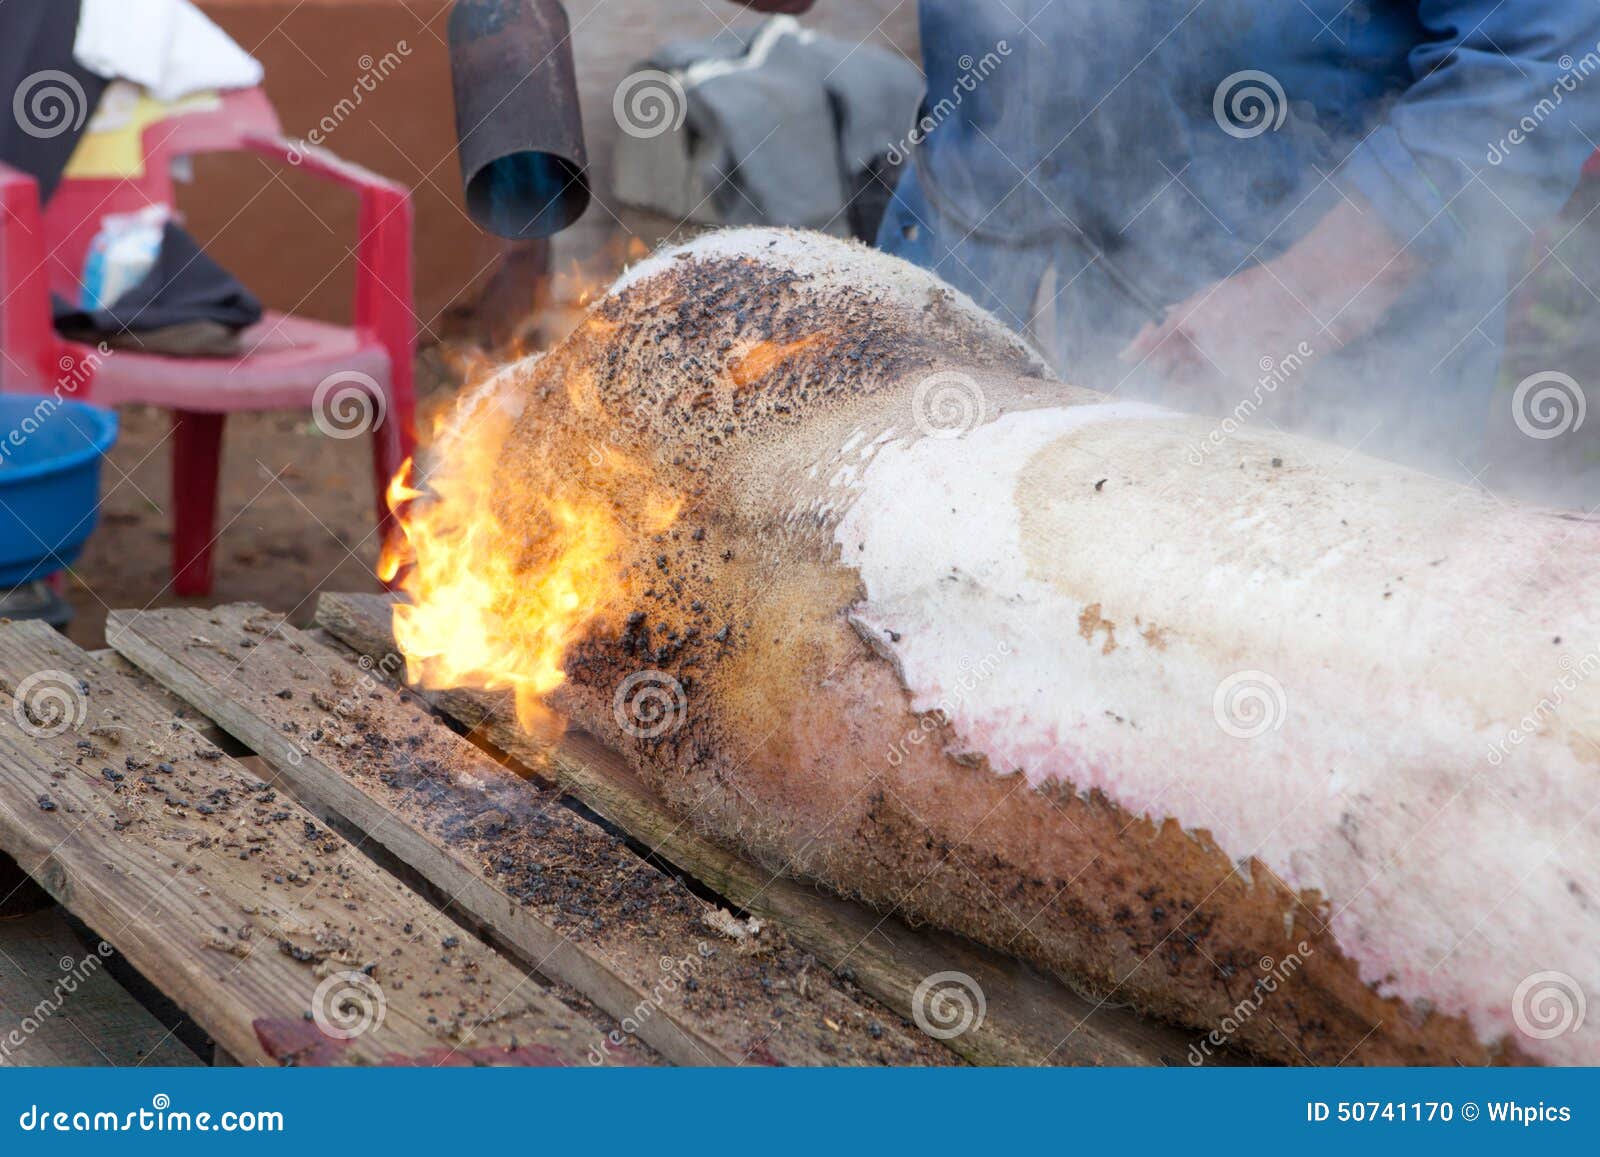 Hair removal of the pig stock photo. Image of hair, farm - 50741170